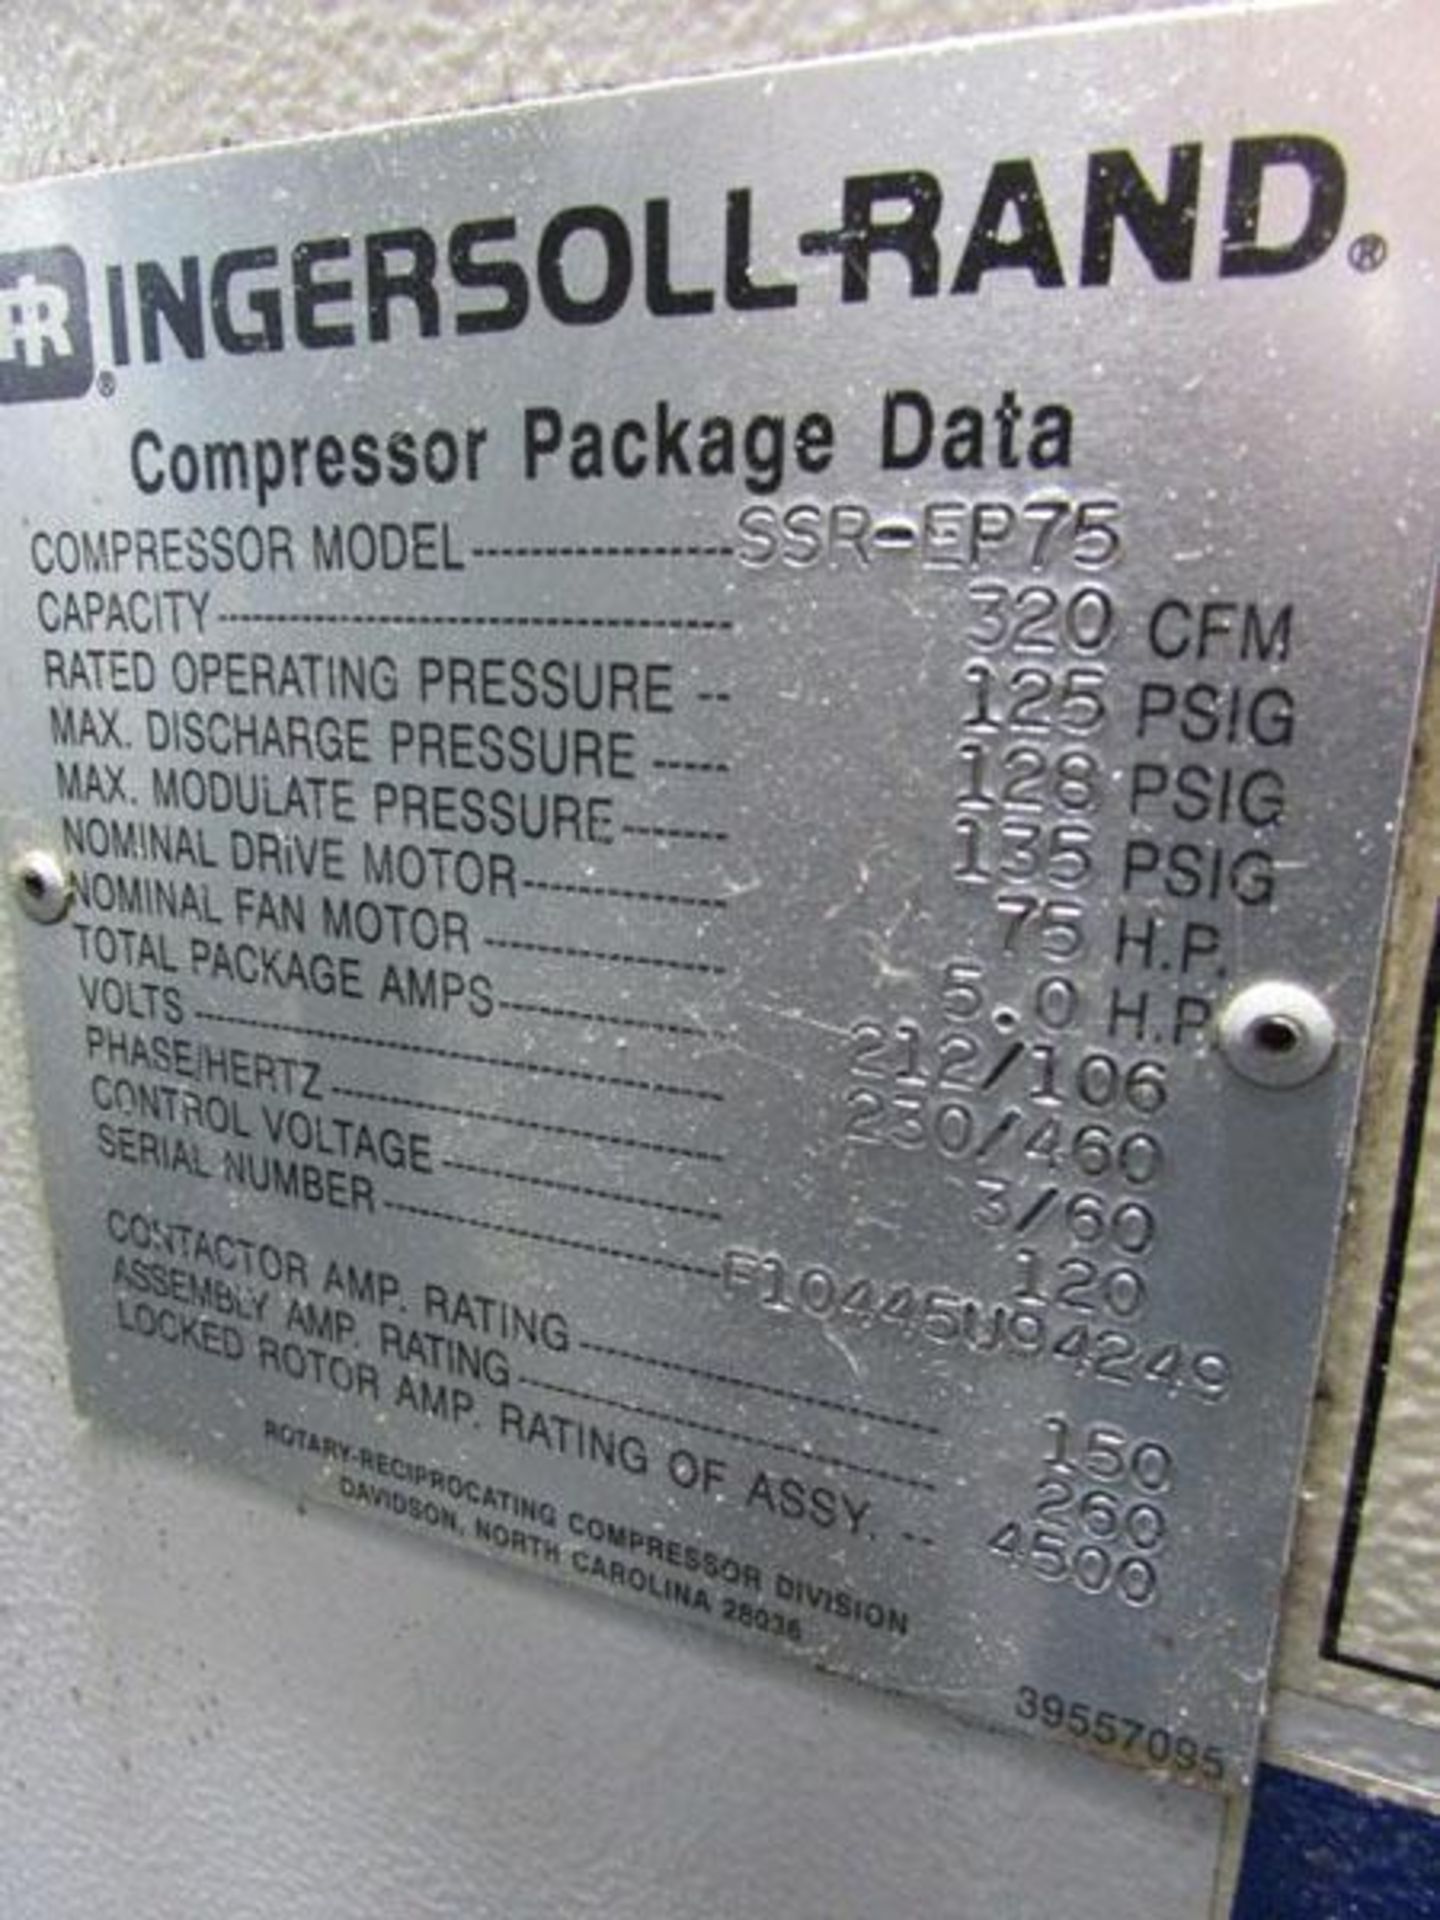 Ingersoll Rand SSR-EP75 75 HP Rotary Screw Air Compressor - Image 8 of 8